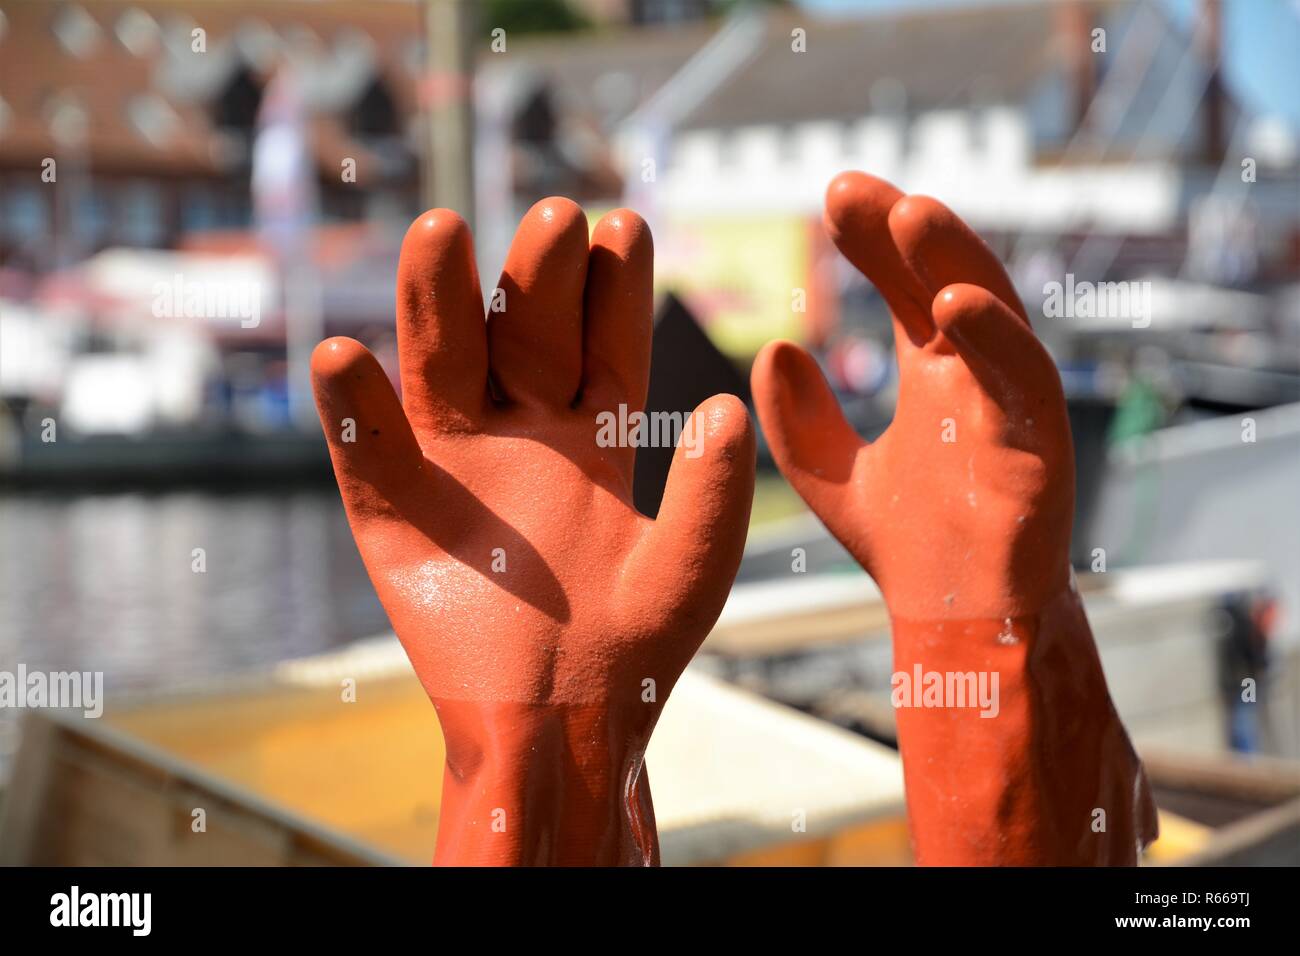 working gloves rubber gloves standing on the harbor background Stock Photo